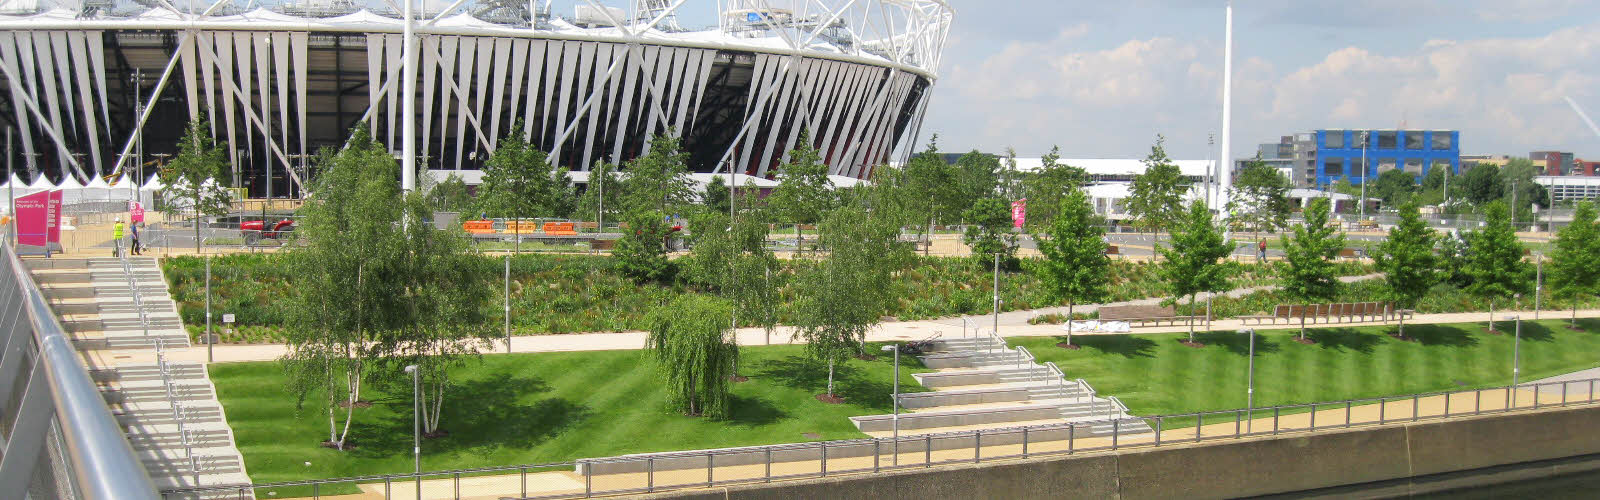 Royal Horticultural_Society_Great_British_Garden_with_stadium